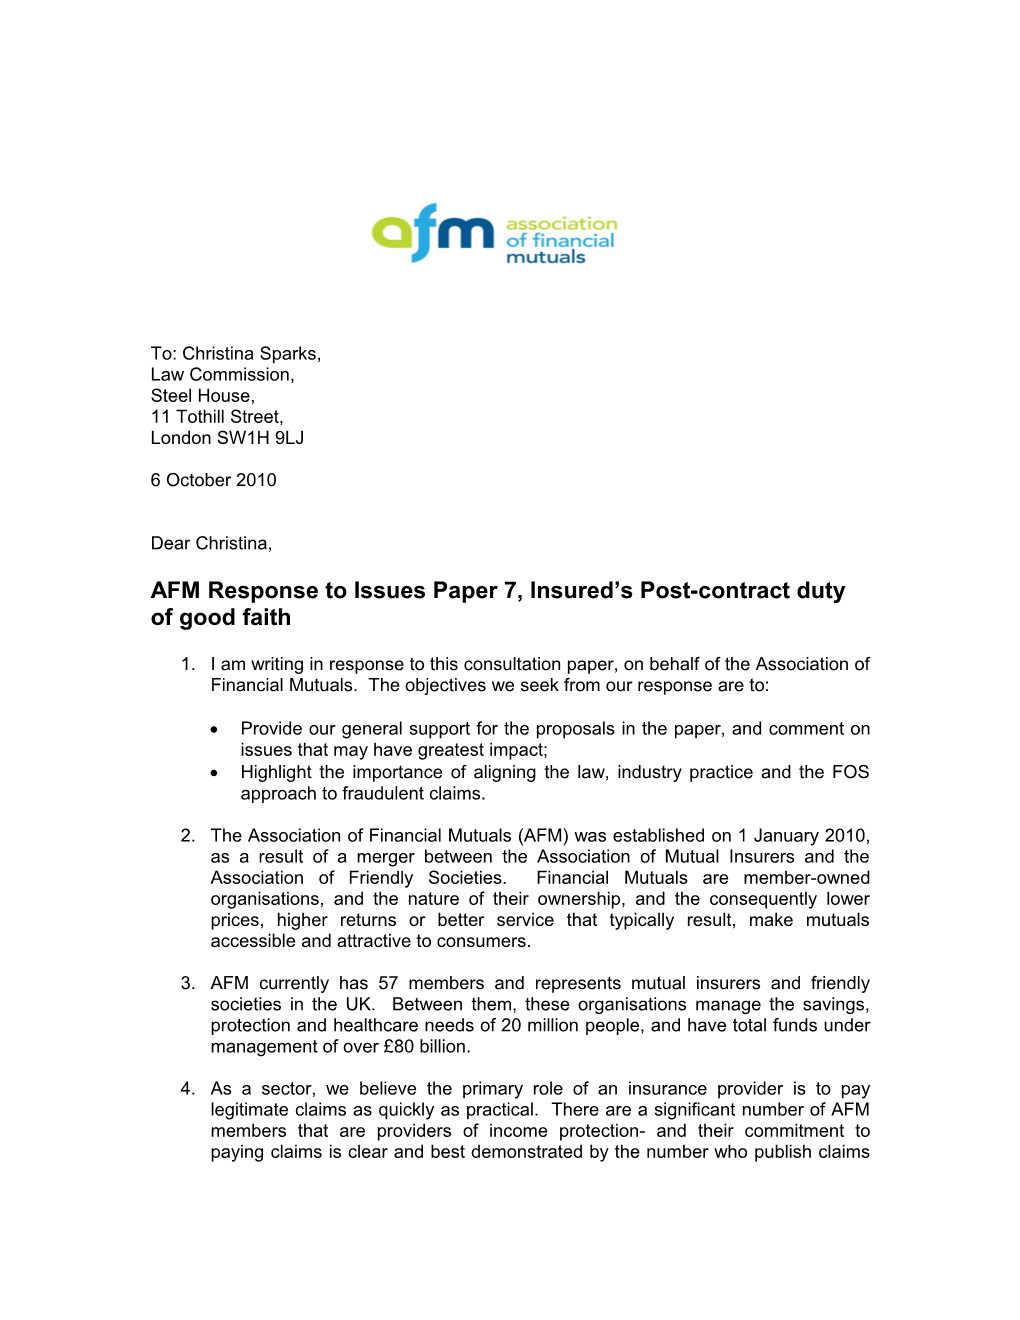 AFM Response Toissues Paper 7, Insured S Post-Contract Duty of Good Faith